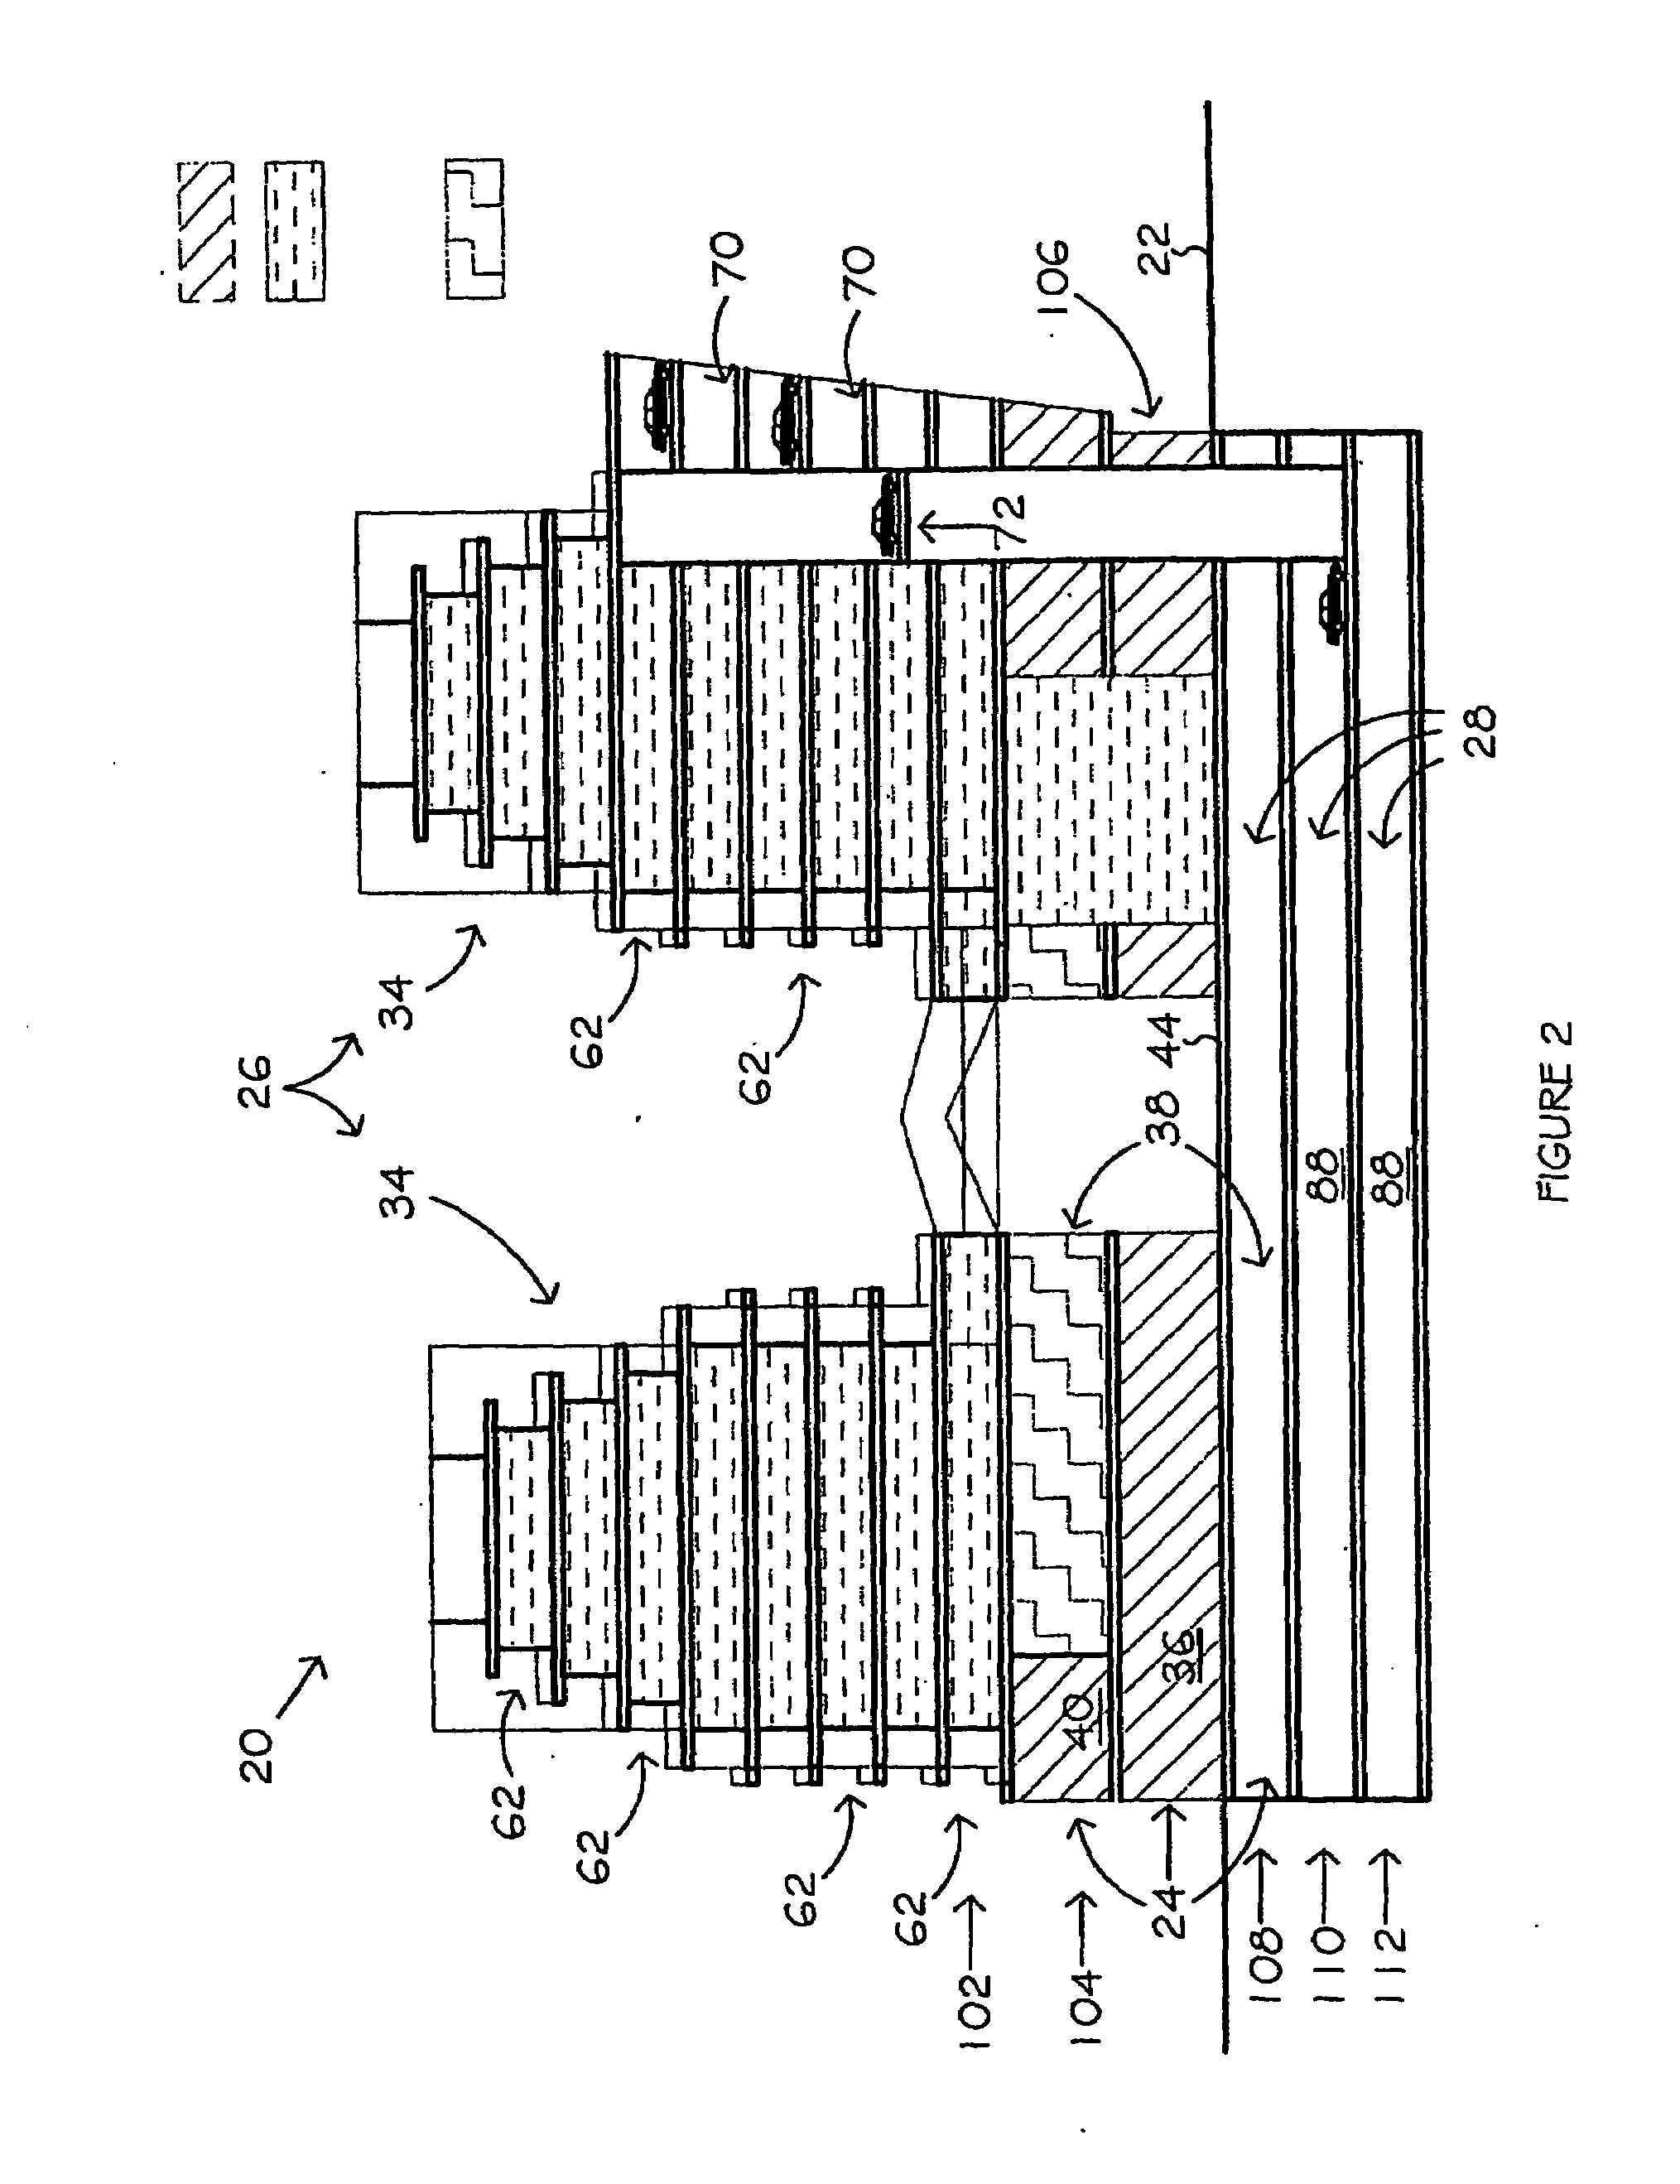 Business method for use with a mixed-use building having a commercial showroom and a multi-unit structure directly accessible therefrom